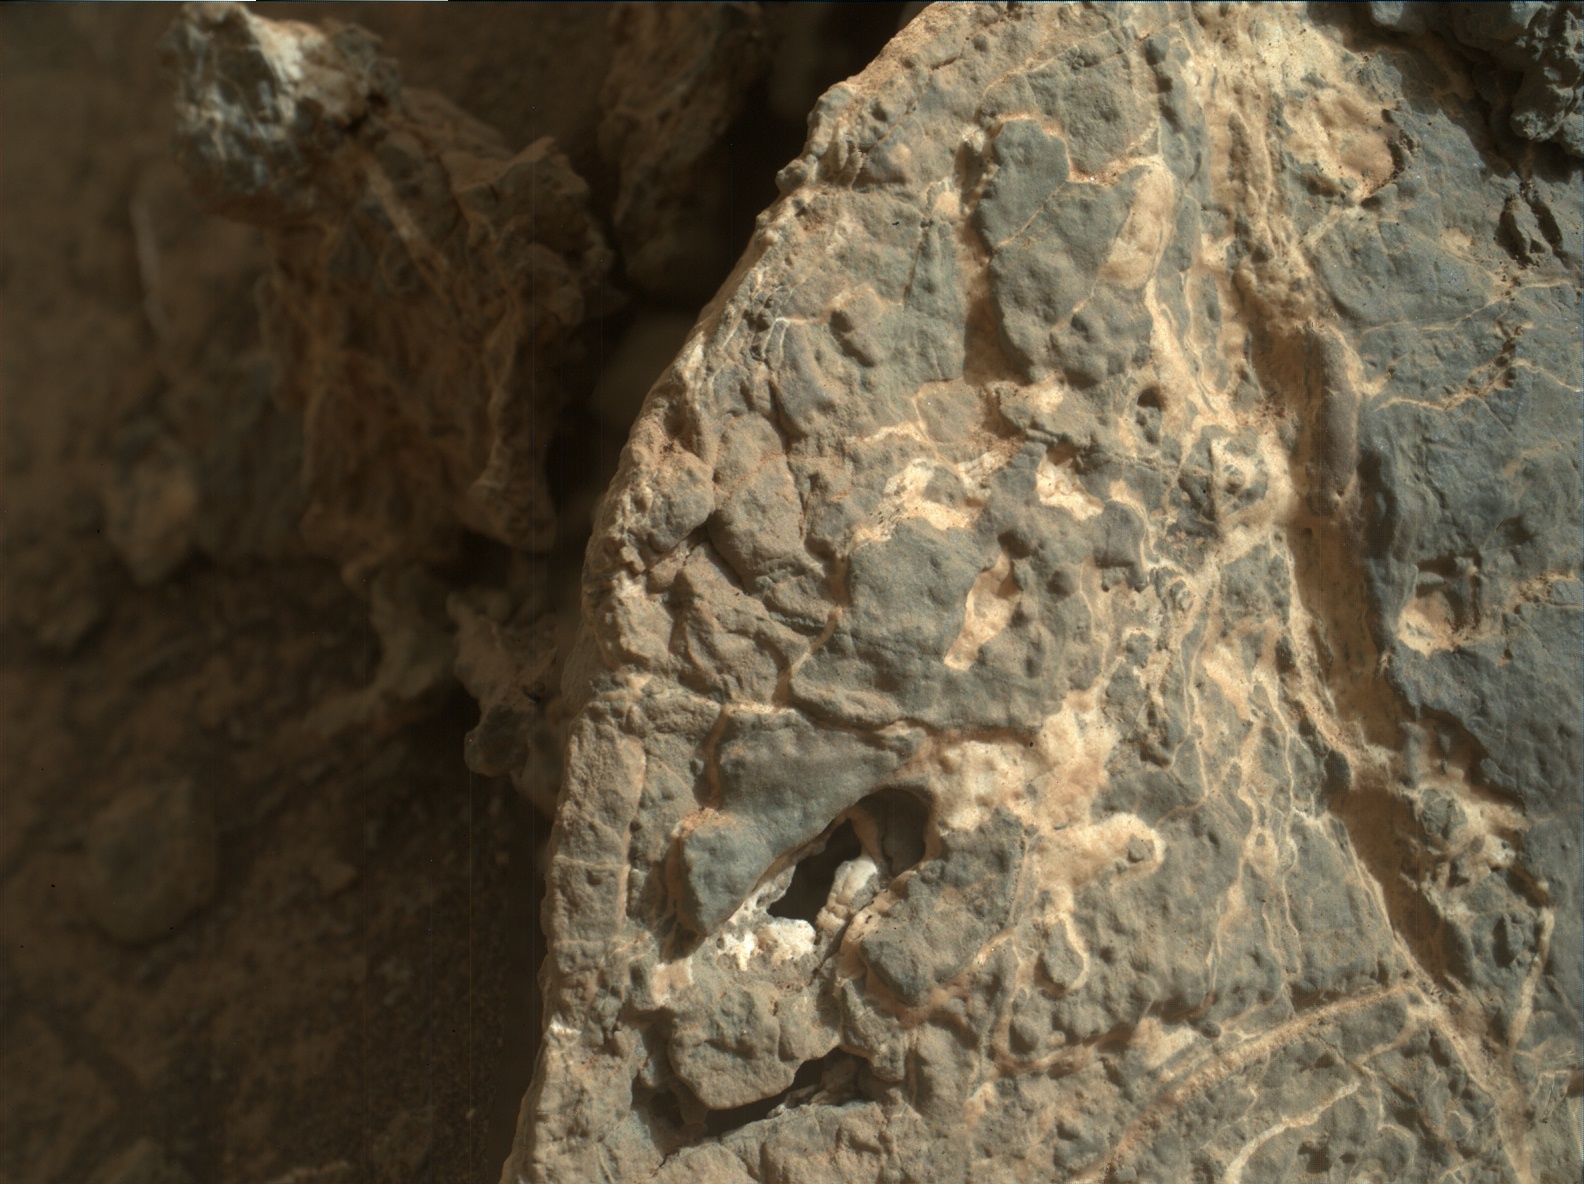 Nasa's Mars rover Curiosity acquired this image using its Mars Hand Lens Imager (MAHLI) on Sol 932